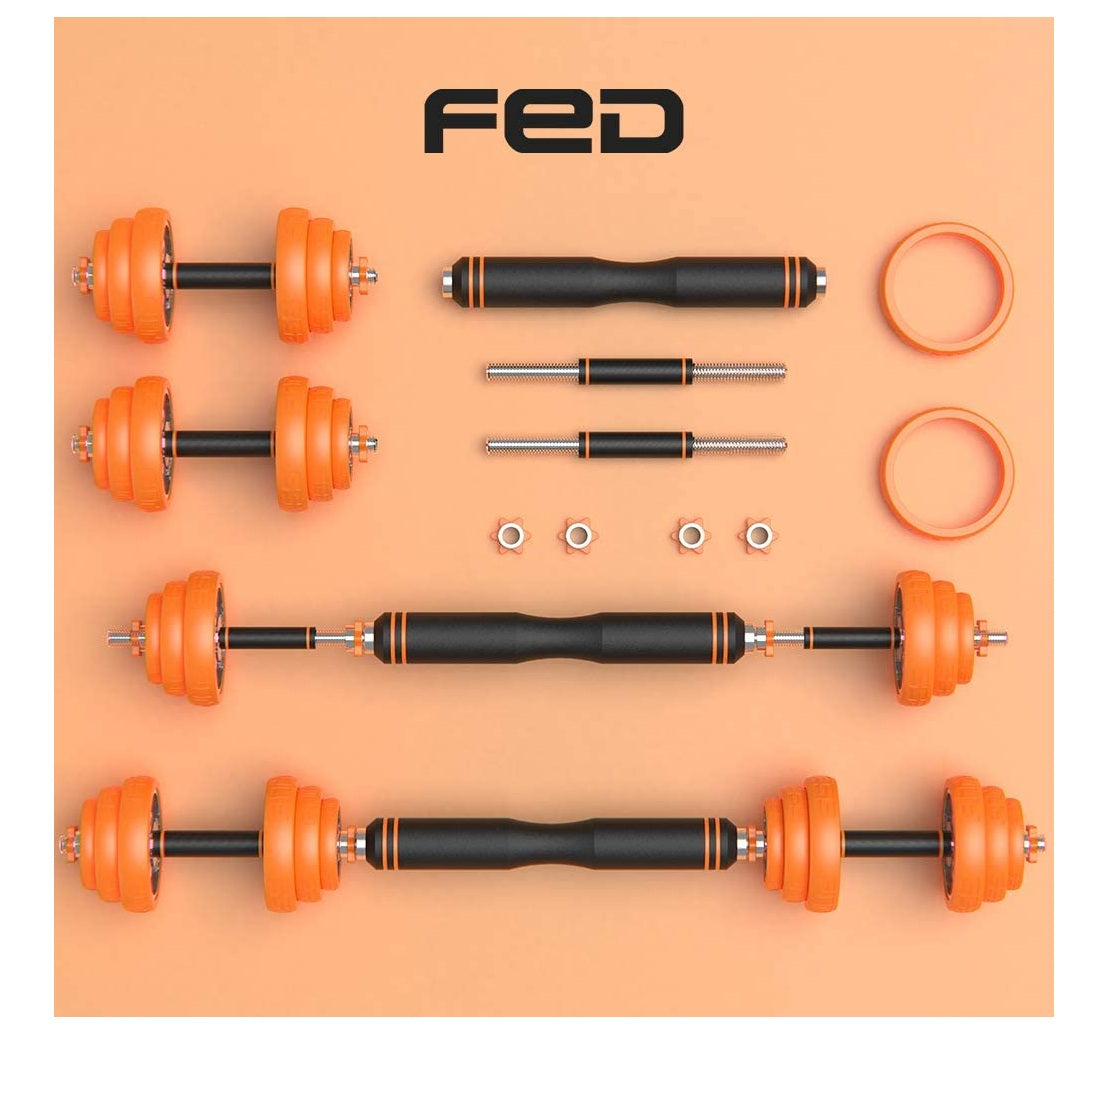 Unisex  Adjustable Dumbbell Set for Home Workout, Non-Slip Weight Lifting Rod with Plates, Dumbbells set with Extension Bar bell rod.